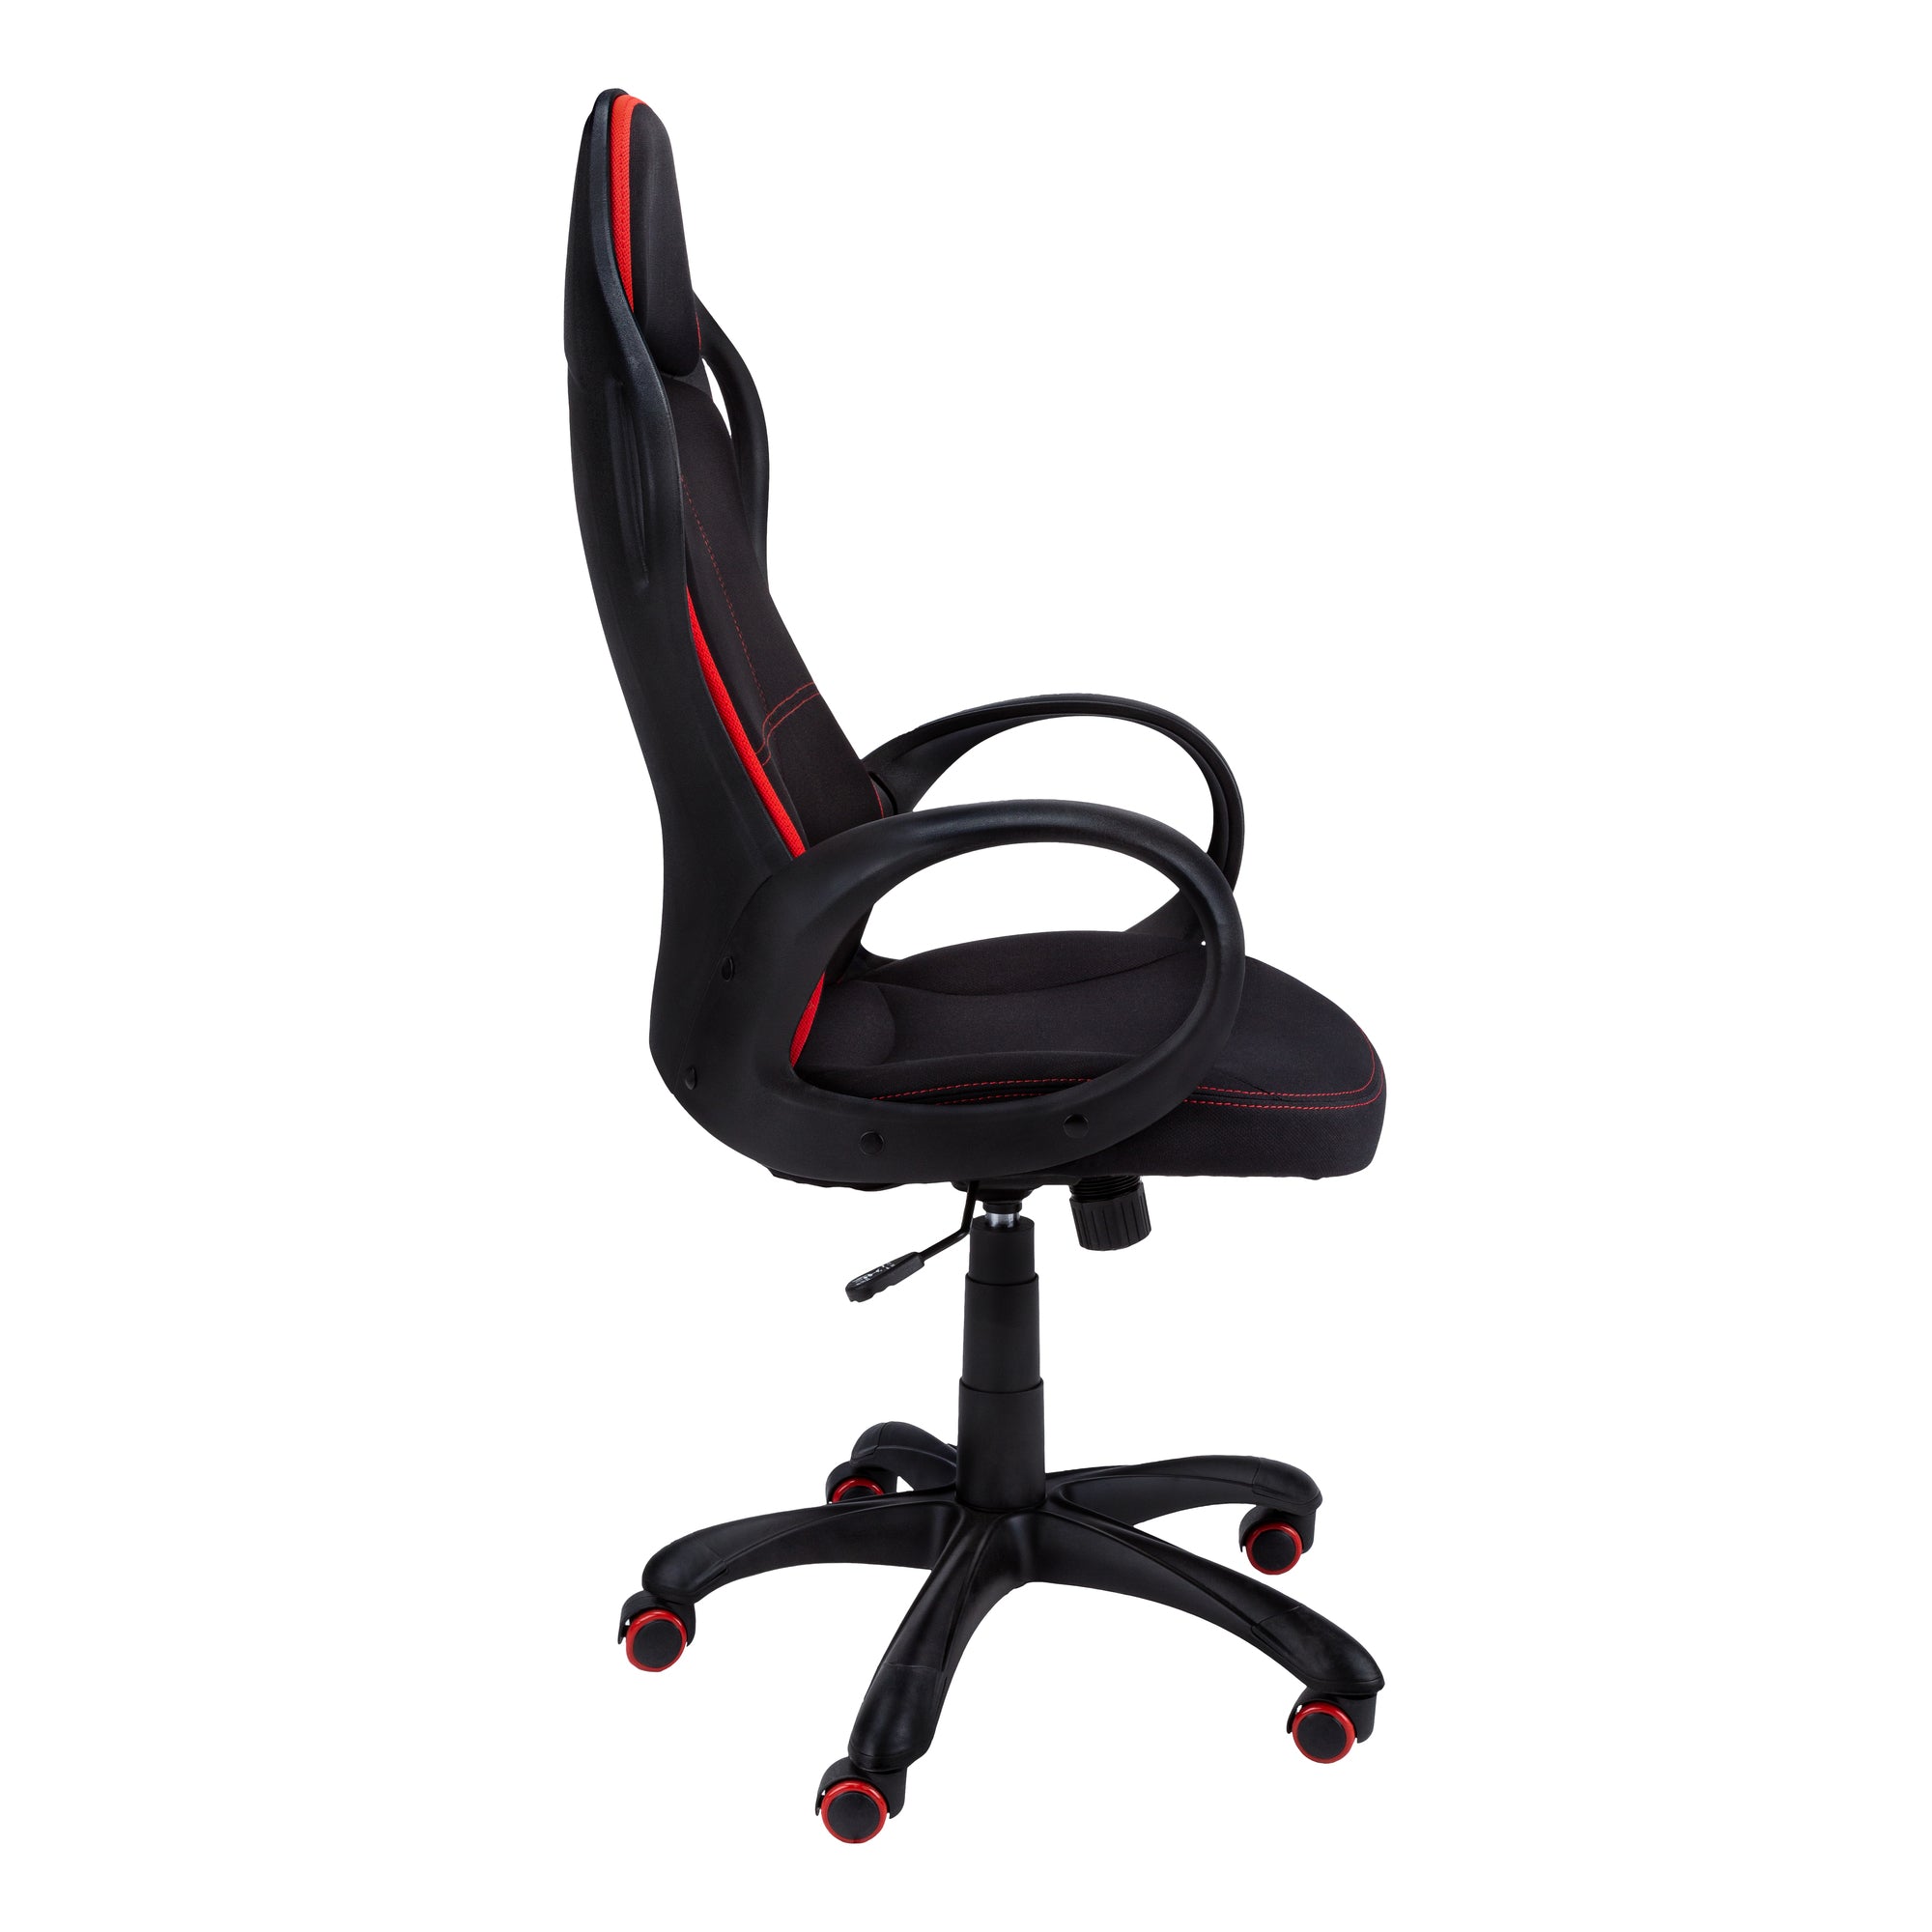 46" Black and Red Fabric Multi Position Office Chair